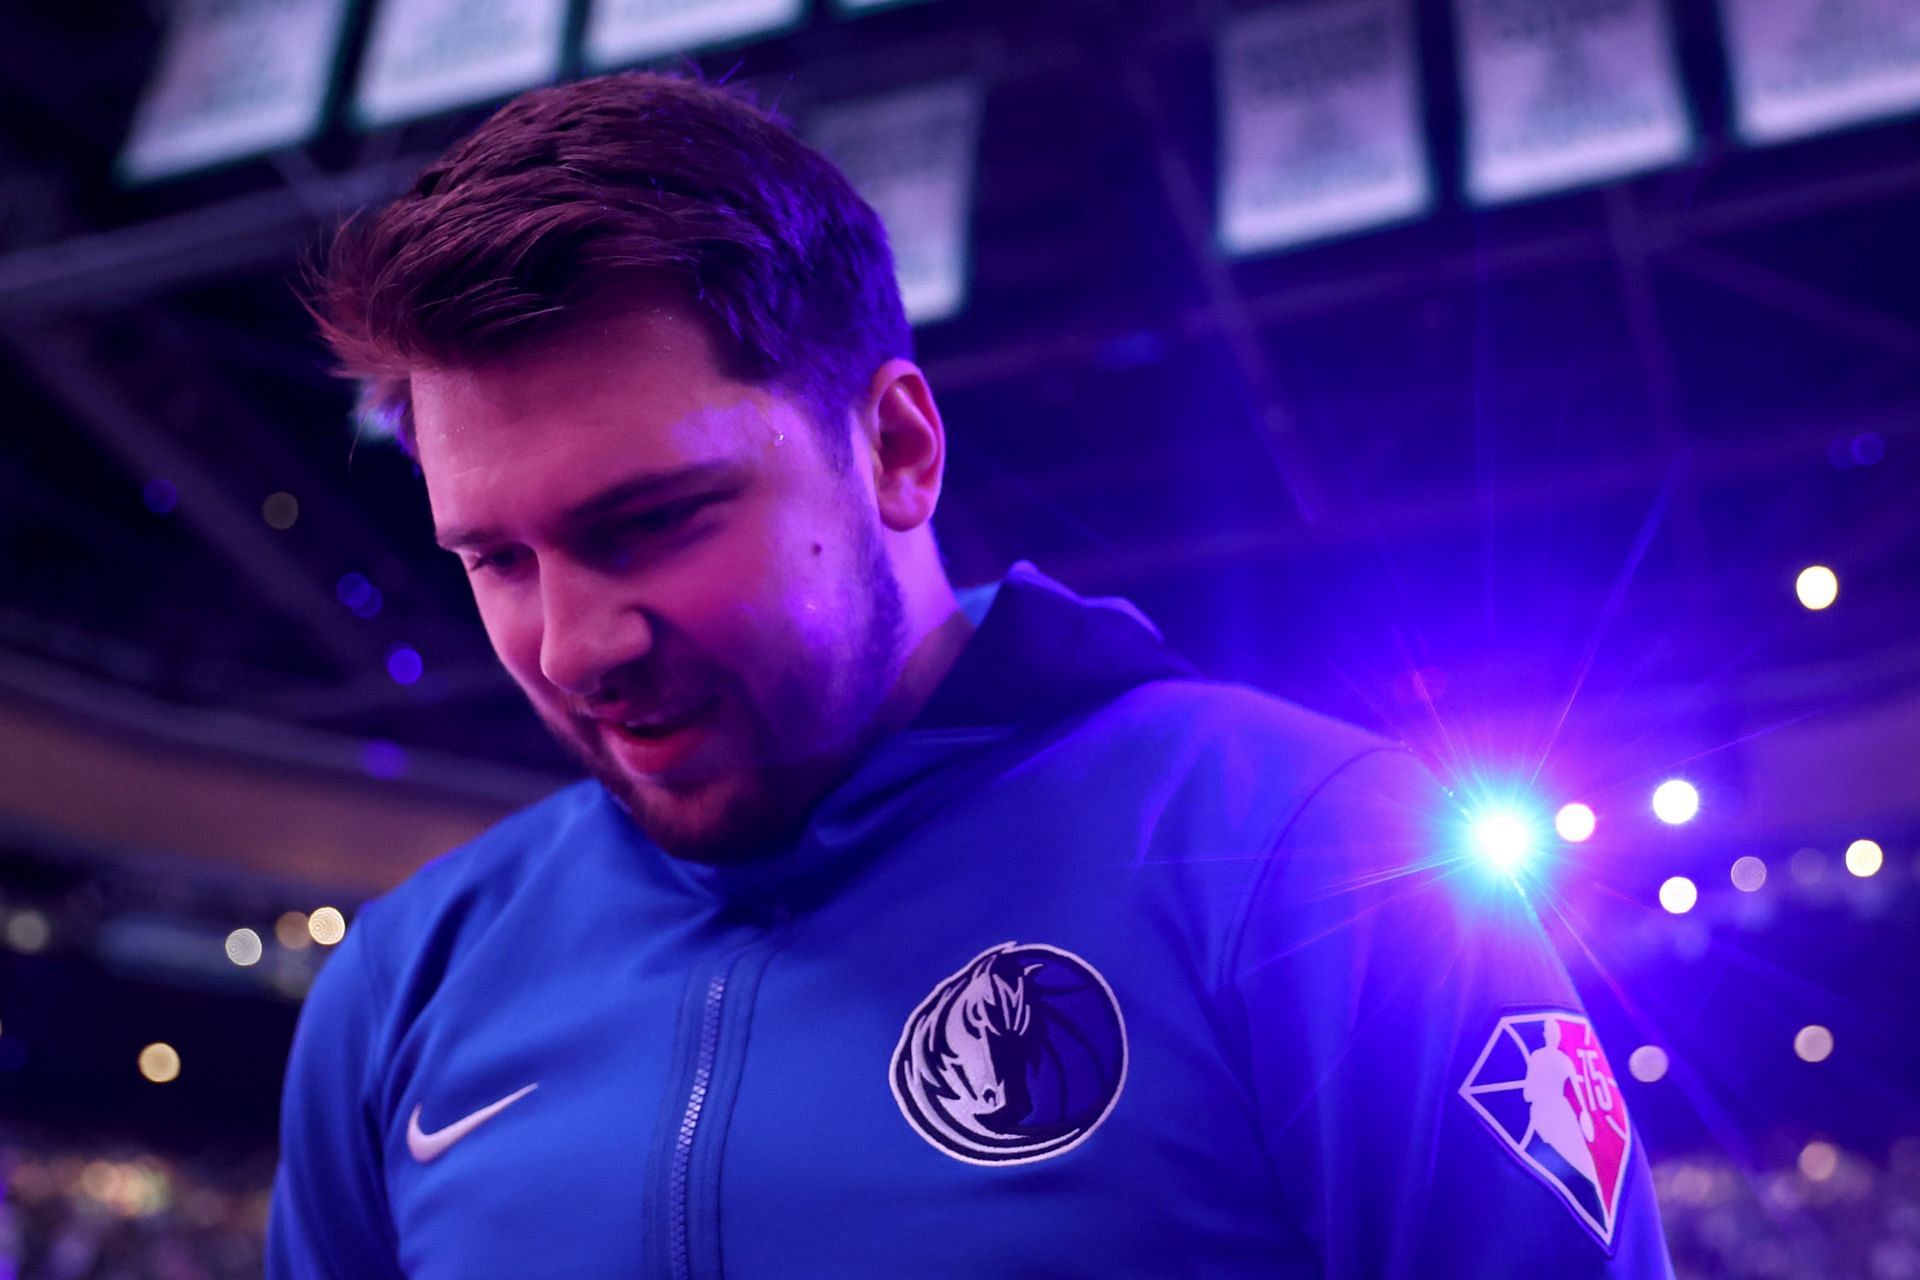 Luka Doncic is making a strong case for the MVP award this season.